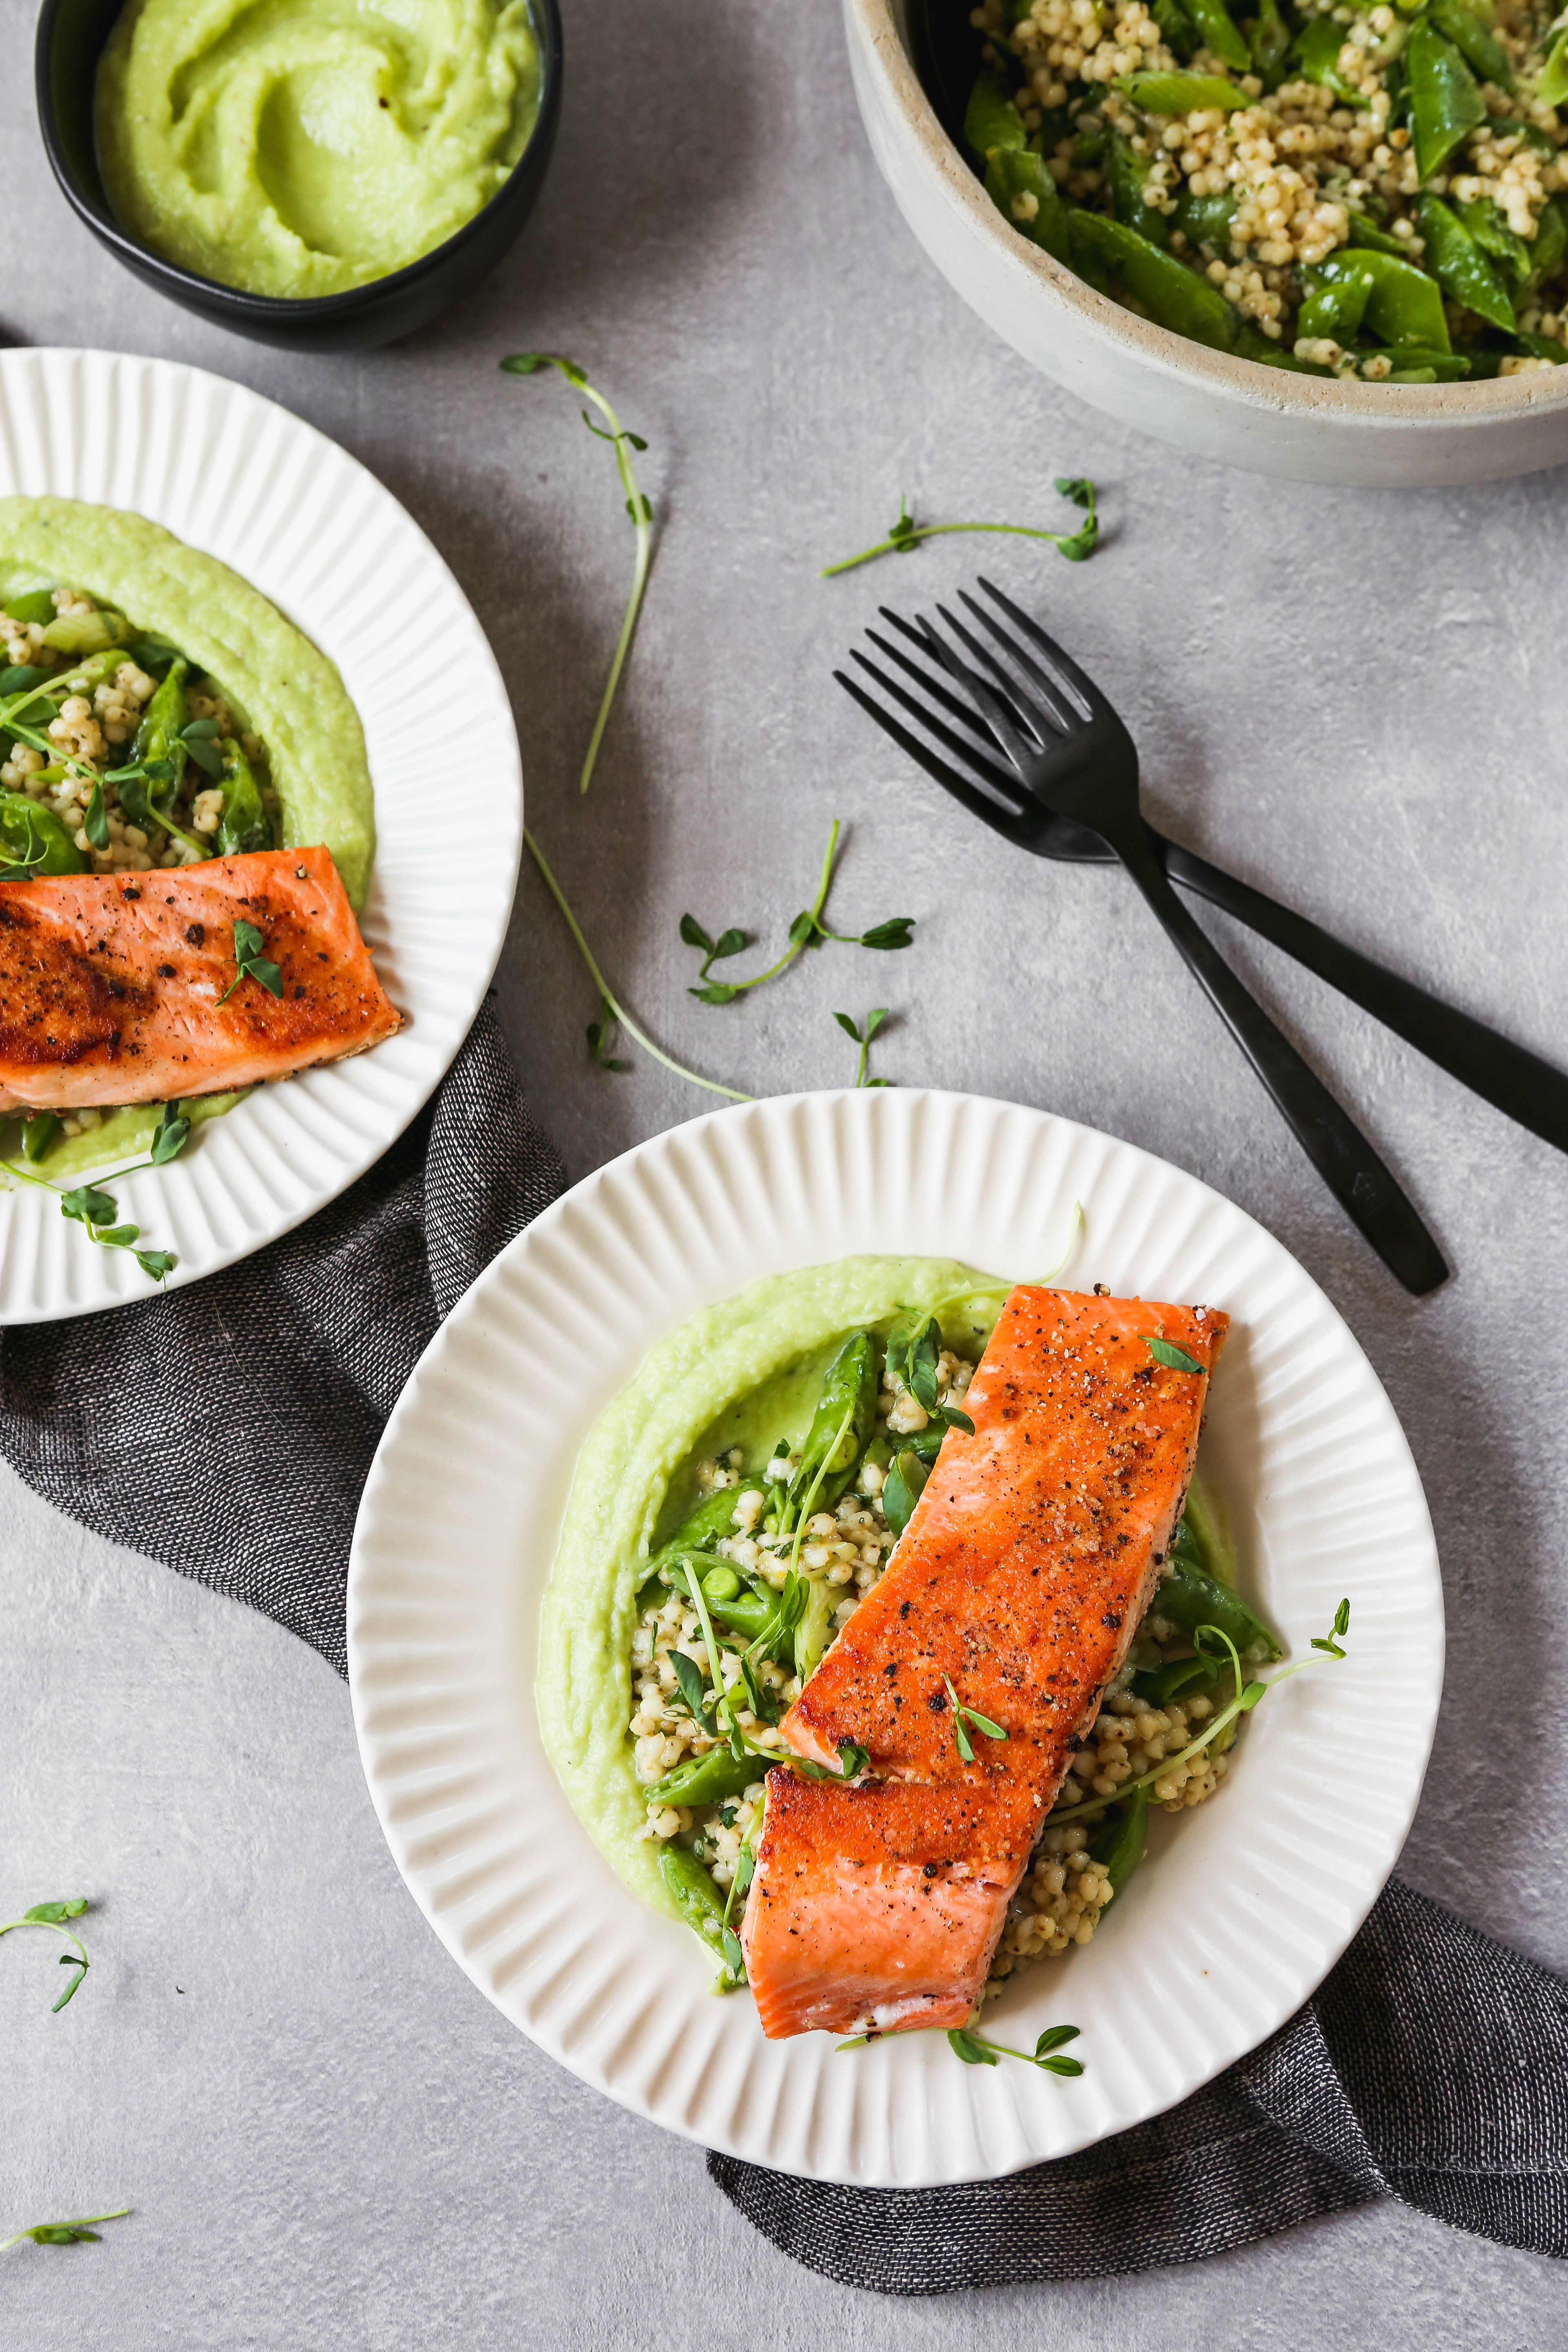 Pan seared salmon on white plates with green sauce and grain salad, set on a gray background.